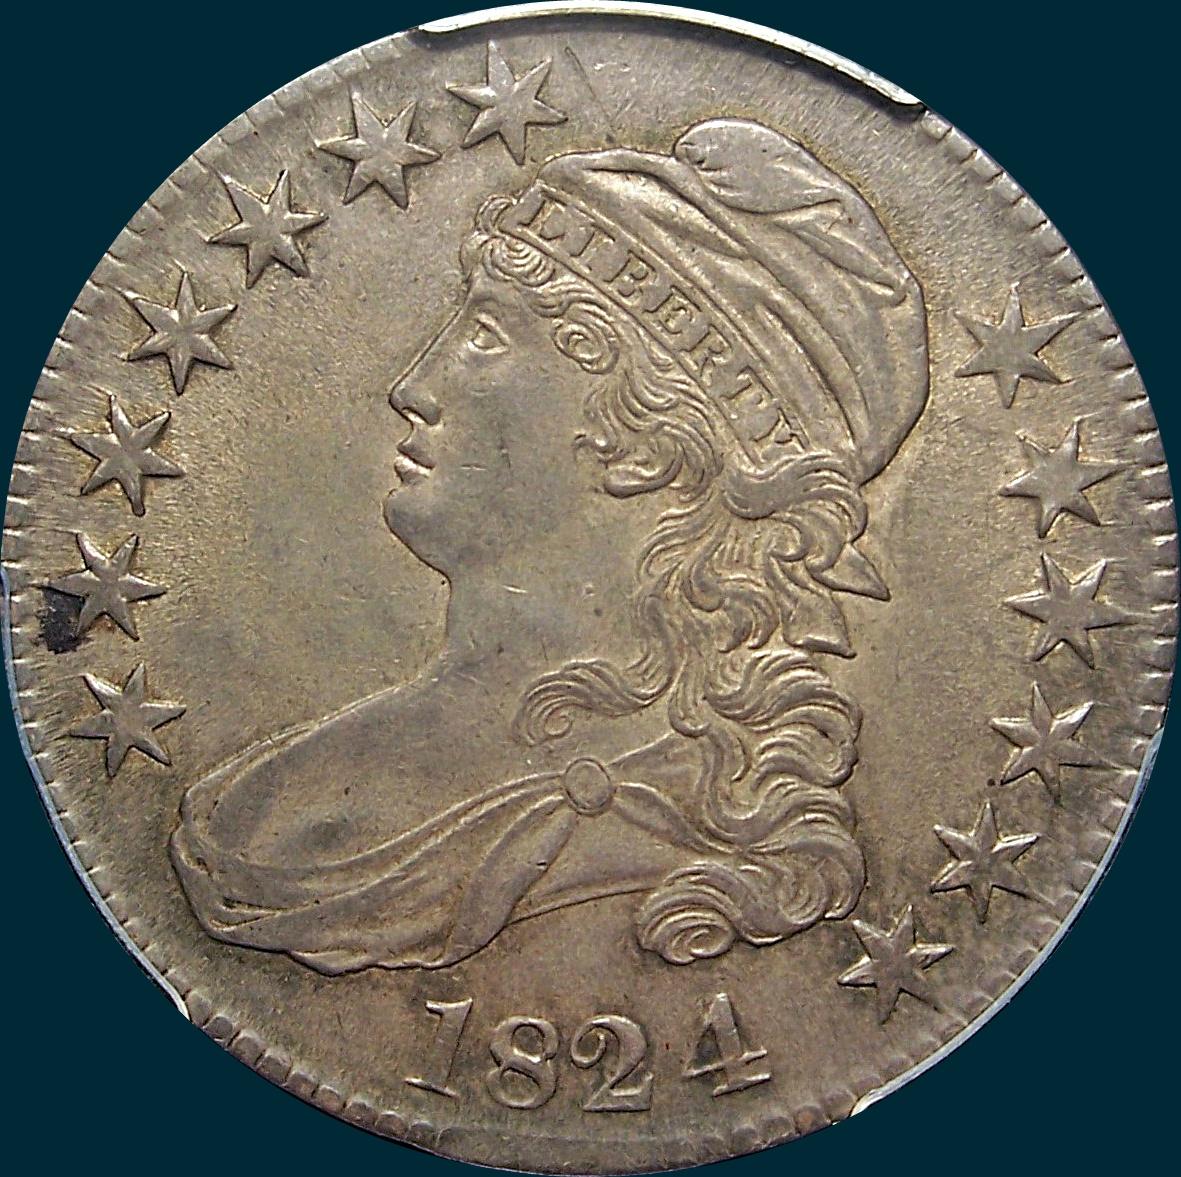 1824 over 4, O-110, capped bust half dollar